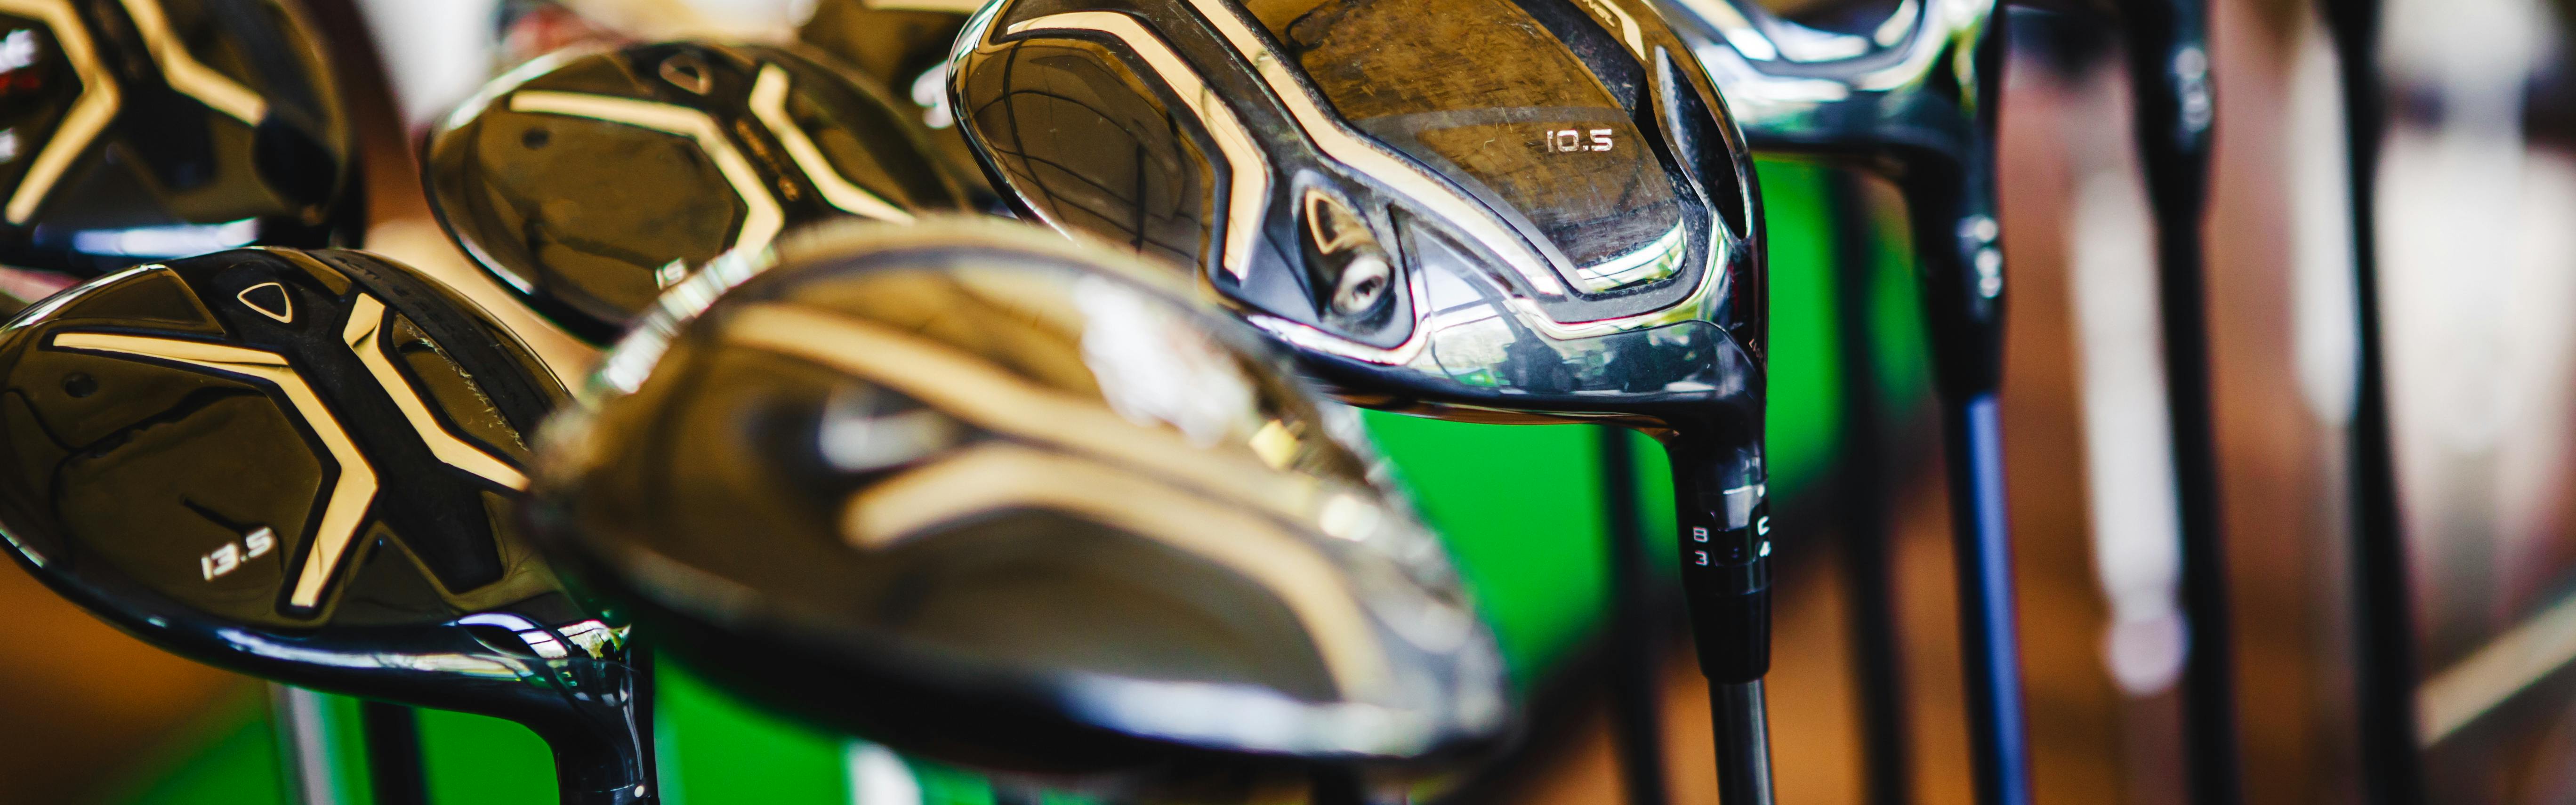 Choosing the Best Loft Angle for Your Driver | Curated.com